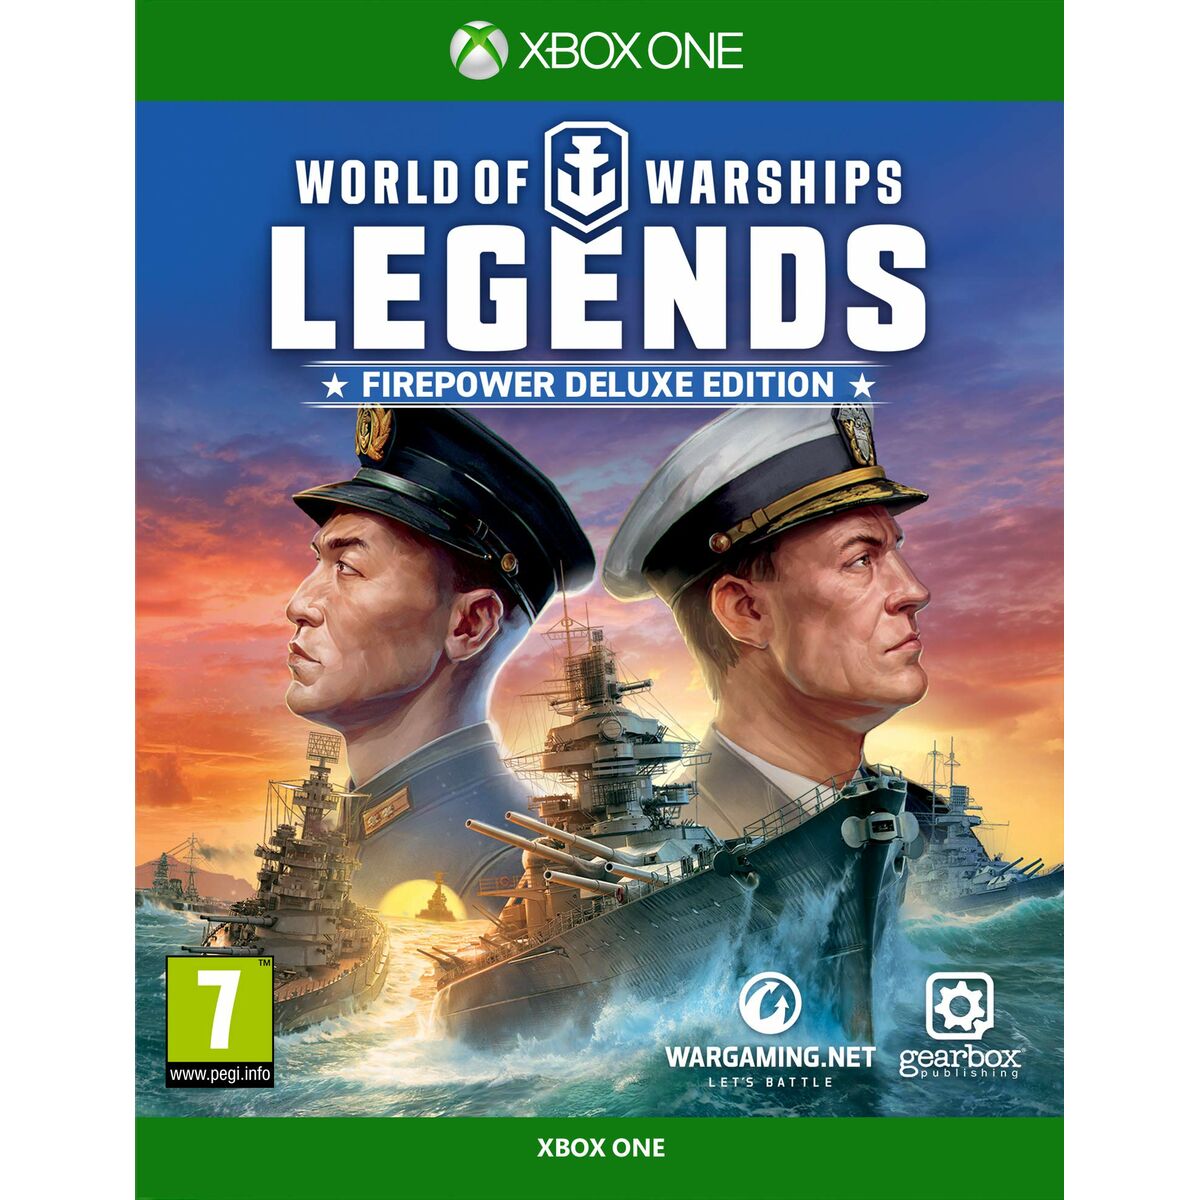 Videogioco per Xbox One Meridiem Games World of Warships Legends - Édition Deluxe